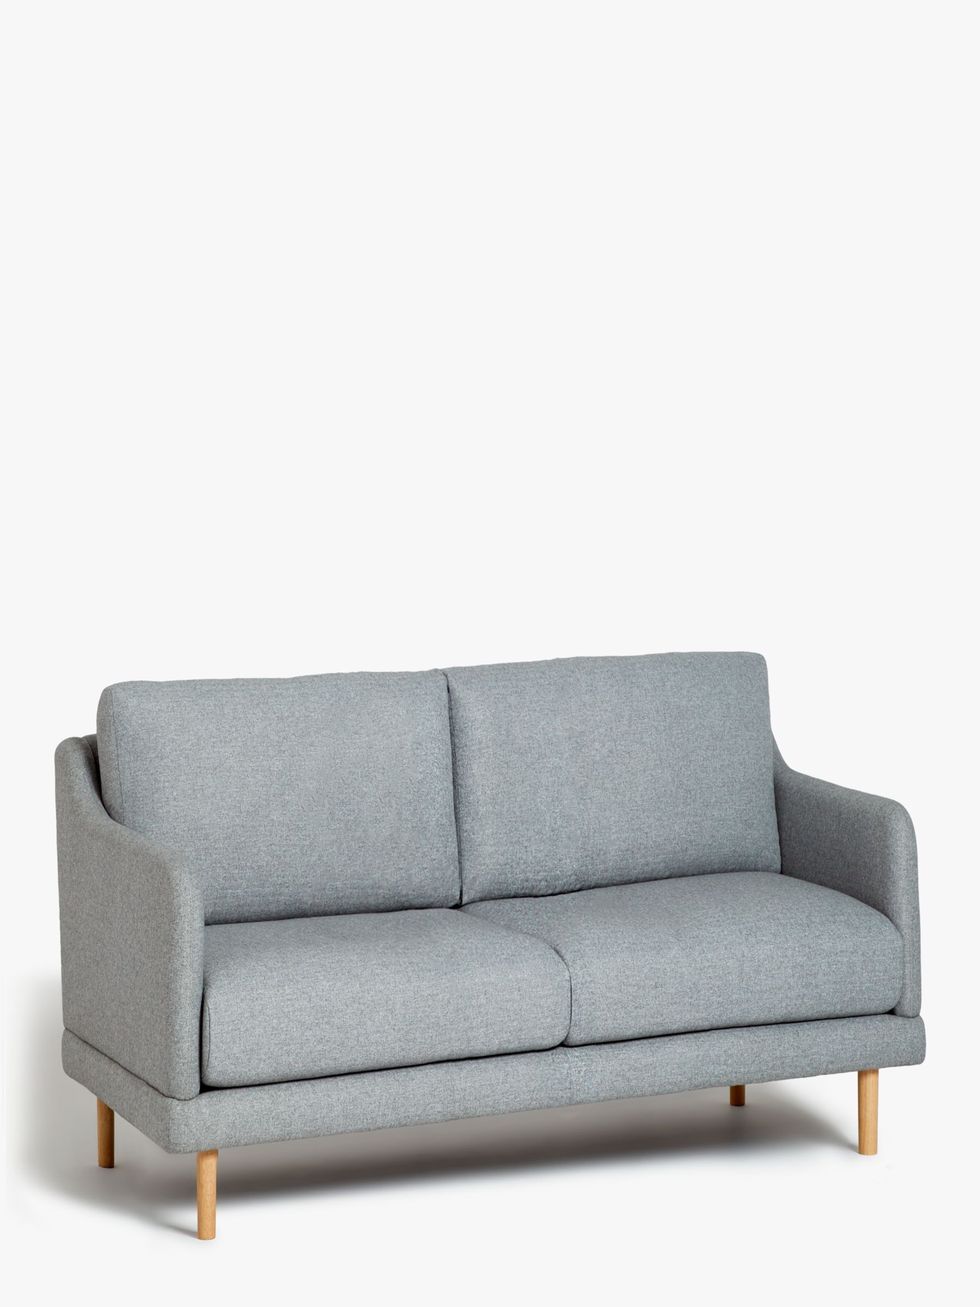 Anyday Sweep Small 2 Seater Sofa, John Lewis, £299